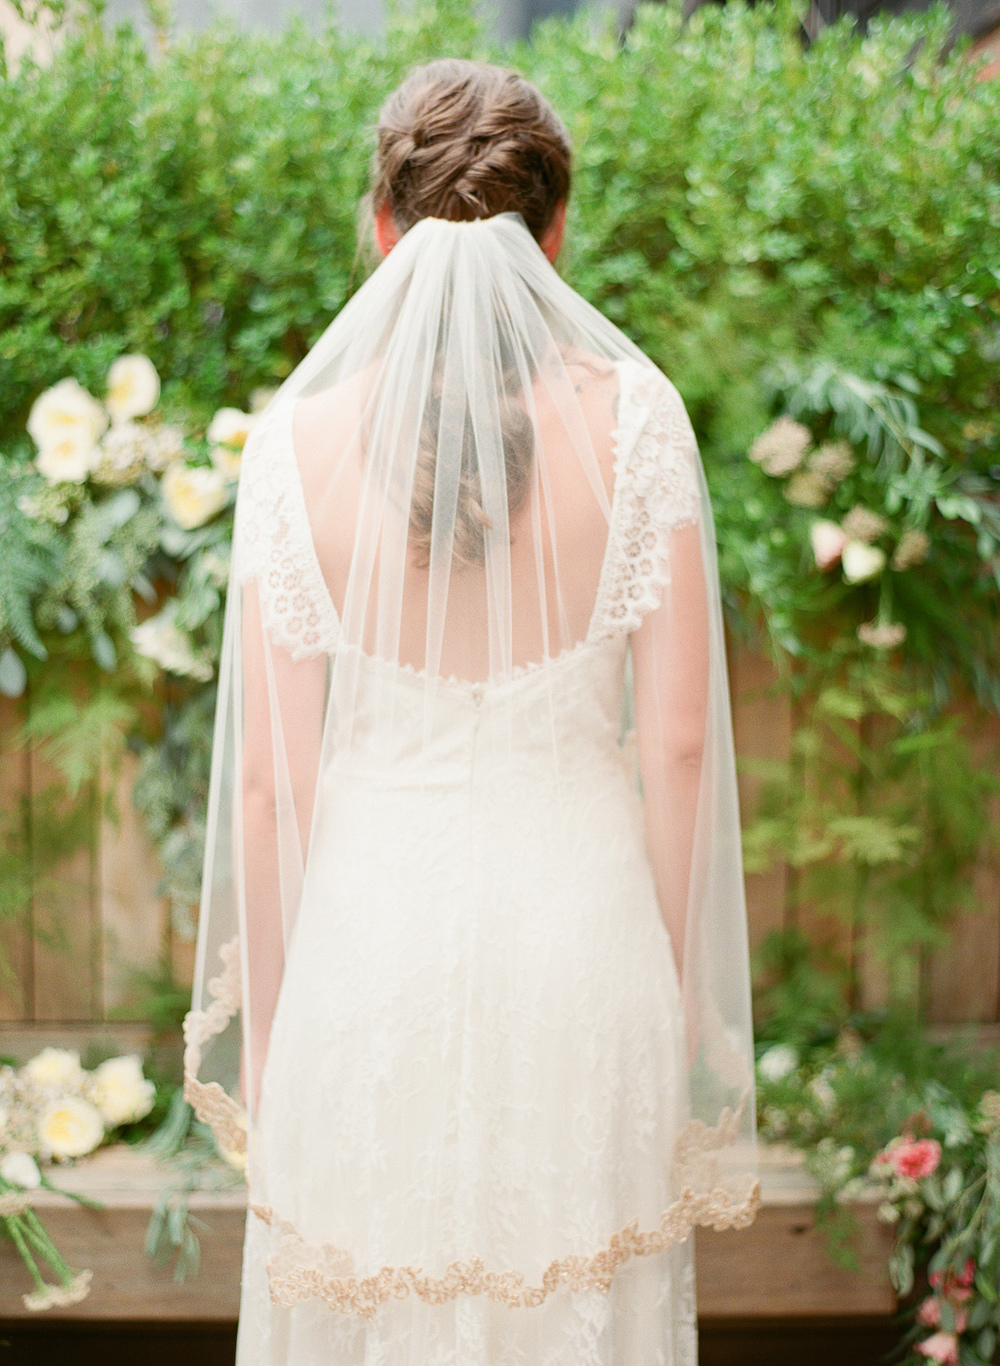 rose gold beaded veil back detail by hushed commotion